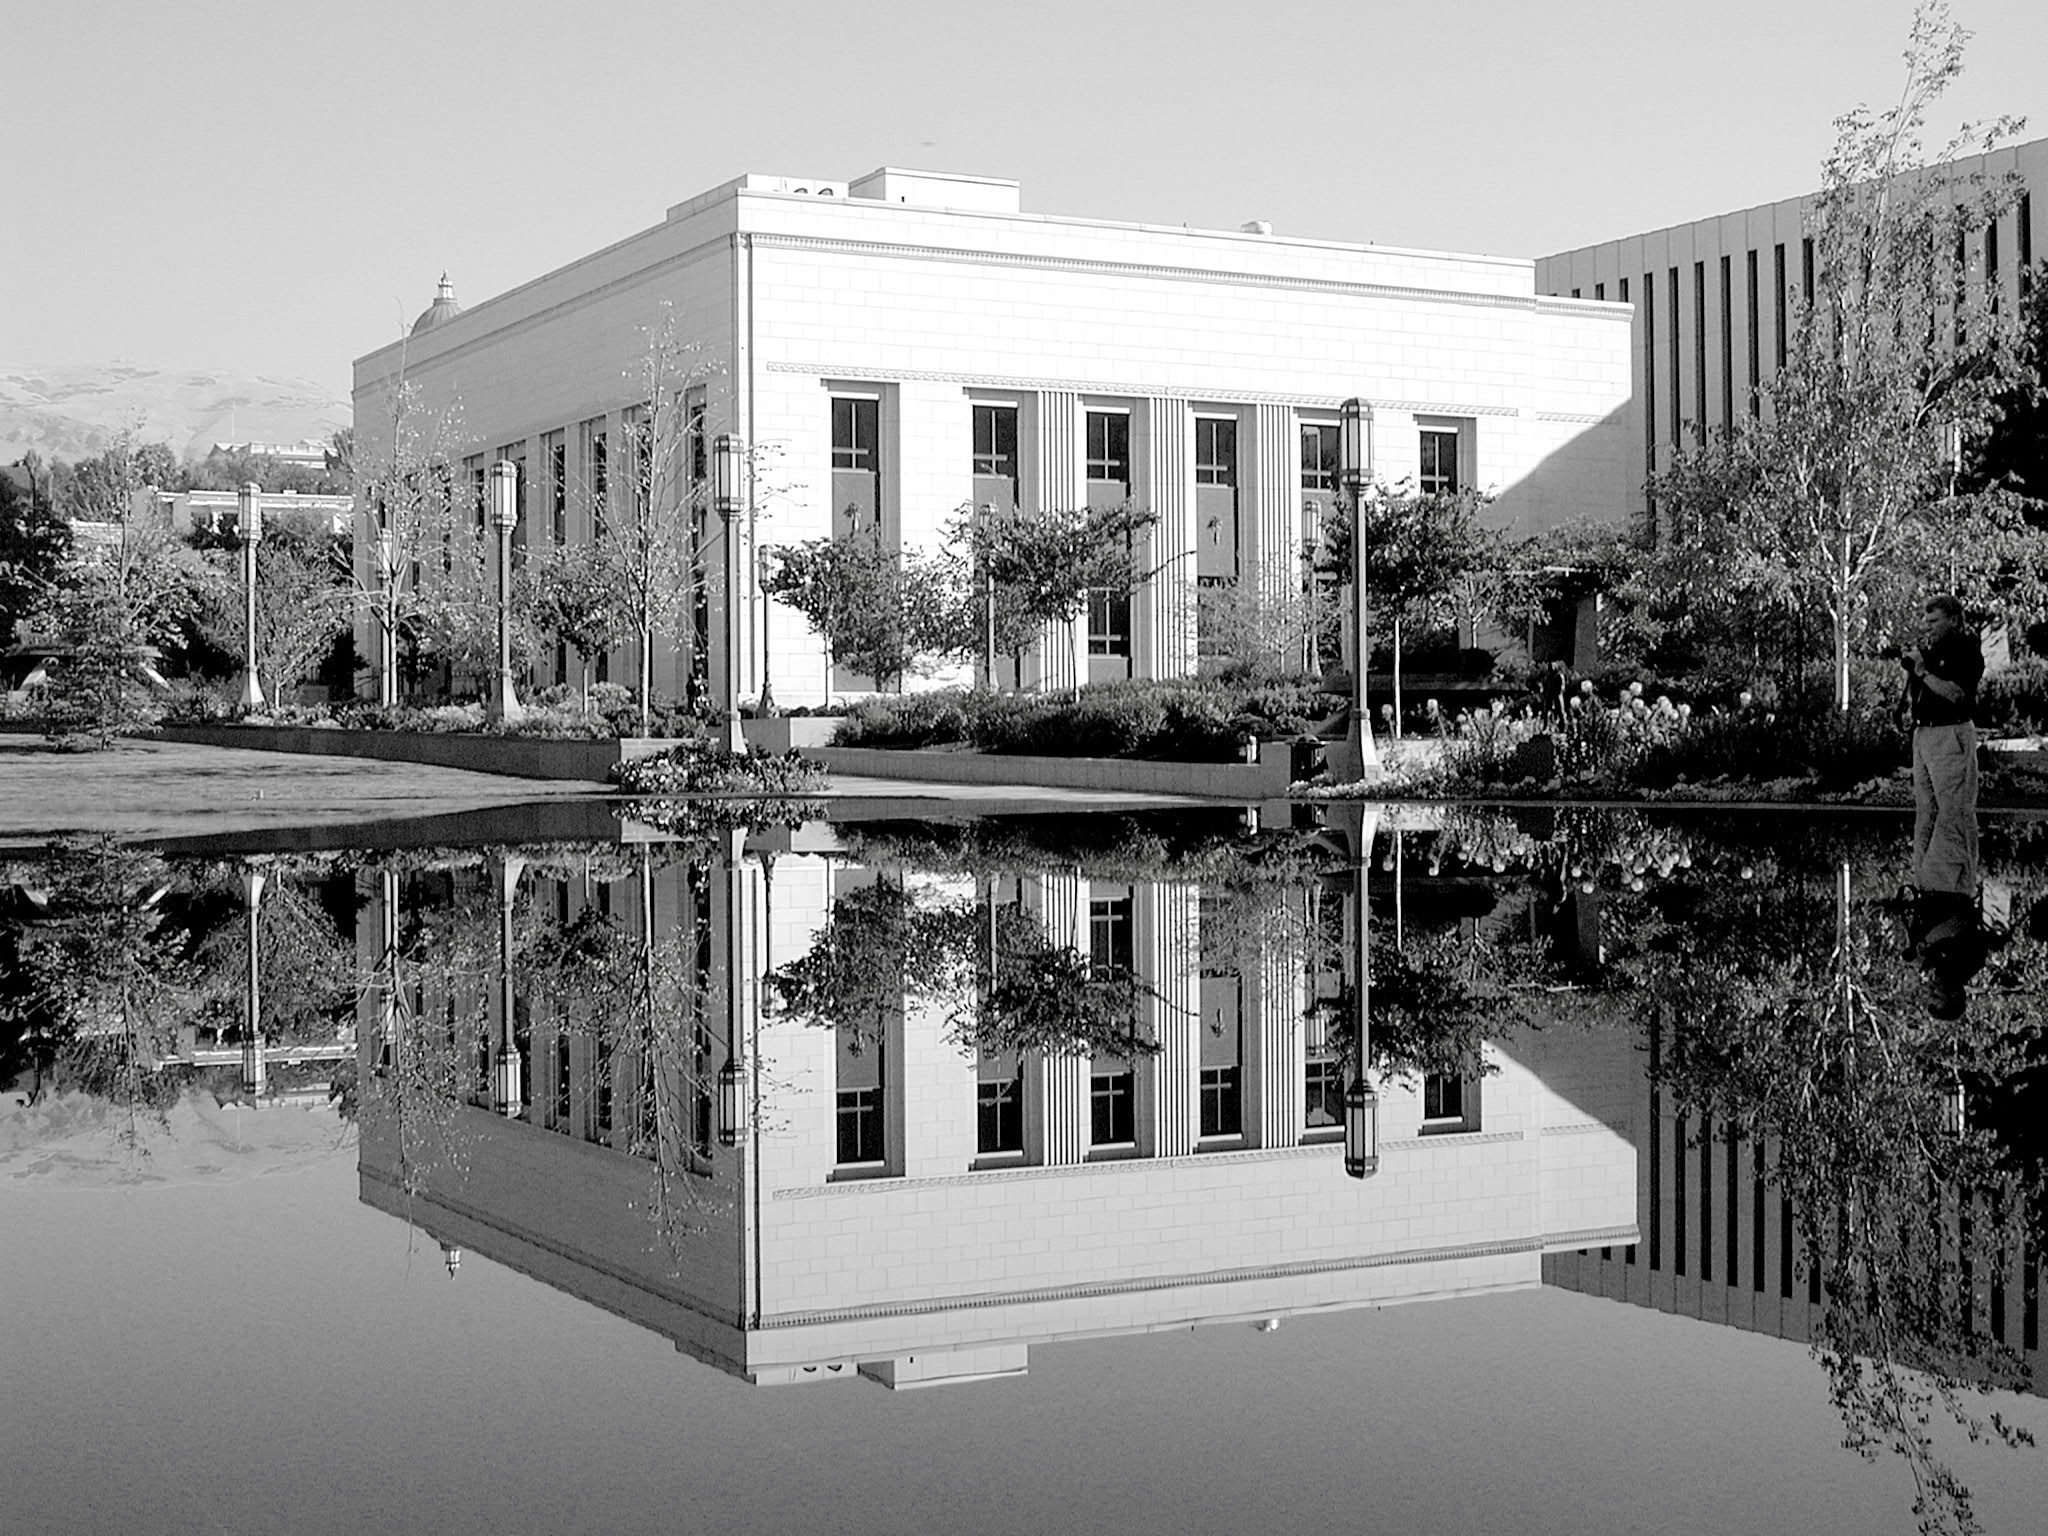 General Relief Society Building reflection pool, 2018. Courtesy of the General Relief Society Presidency.